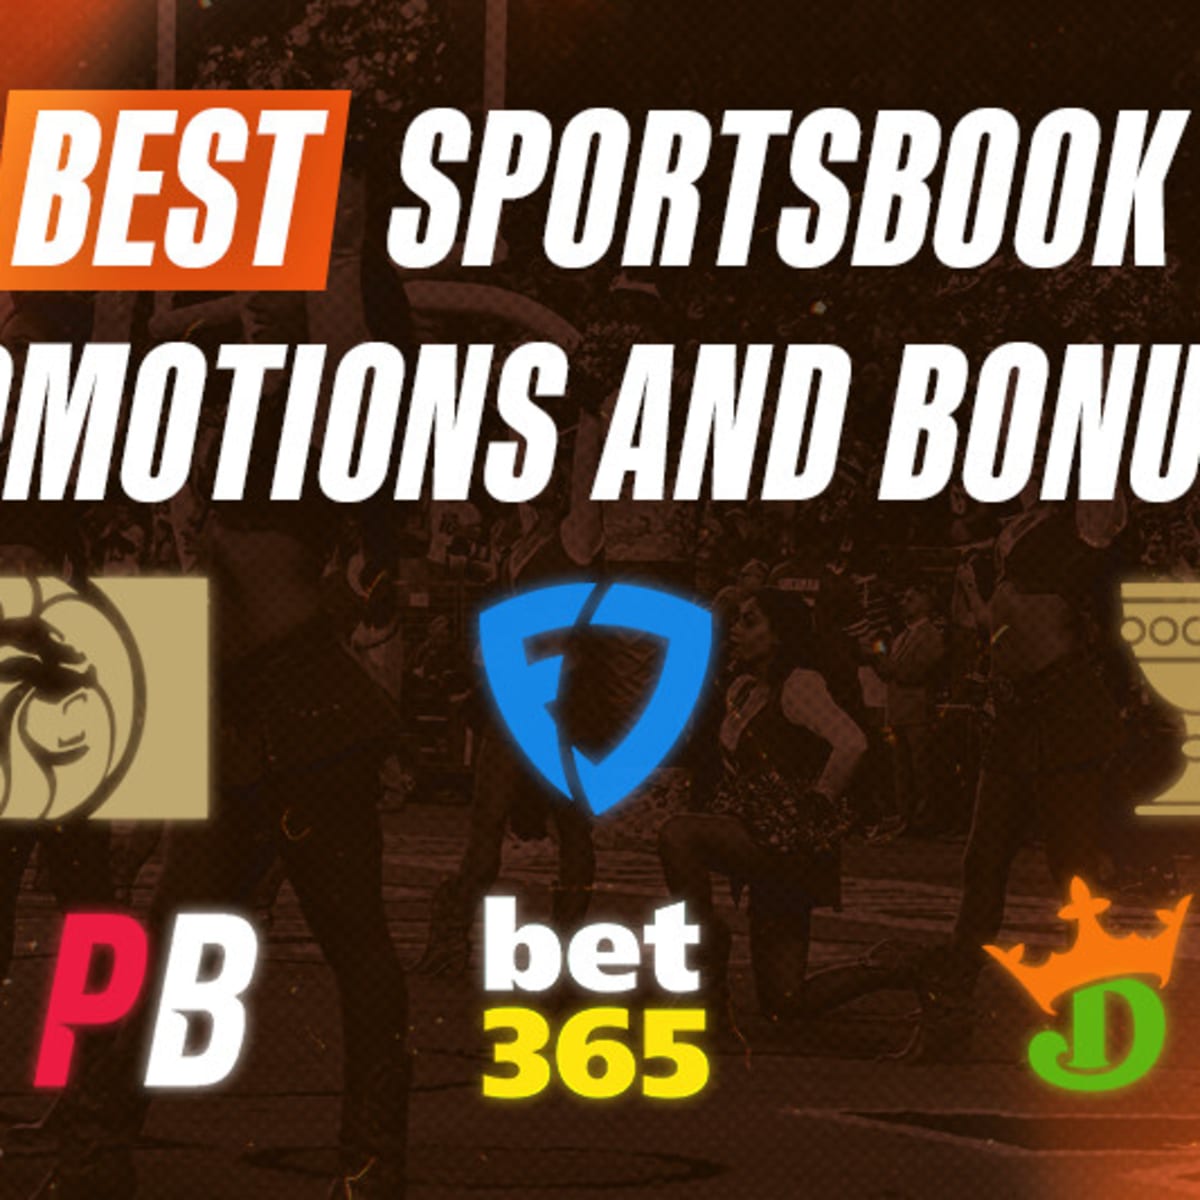 Cash In on NFL Wild Card Weekend: Bet $5, Get $150 in Free Bets